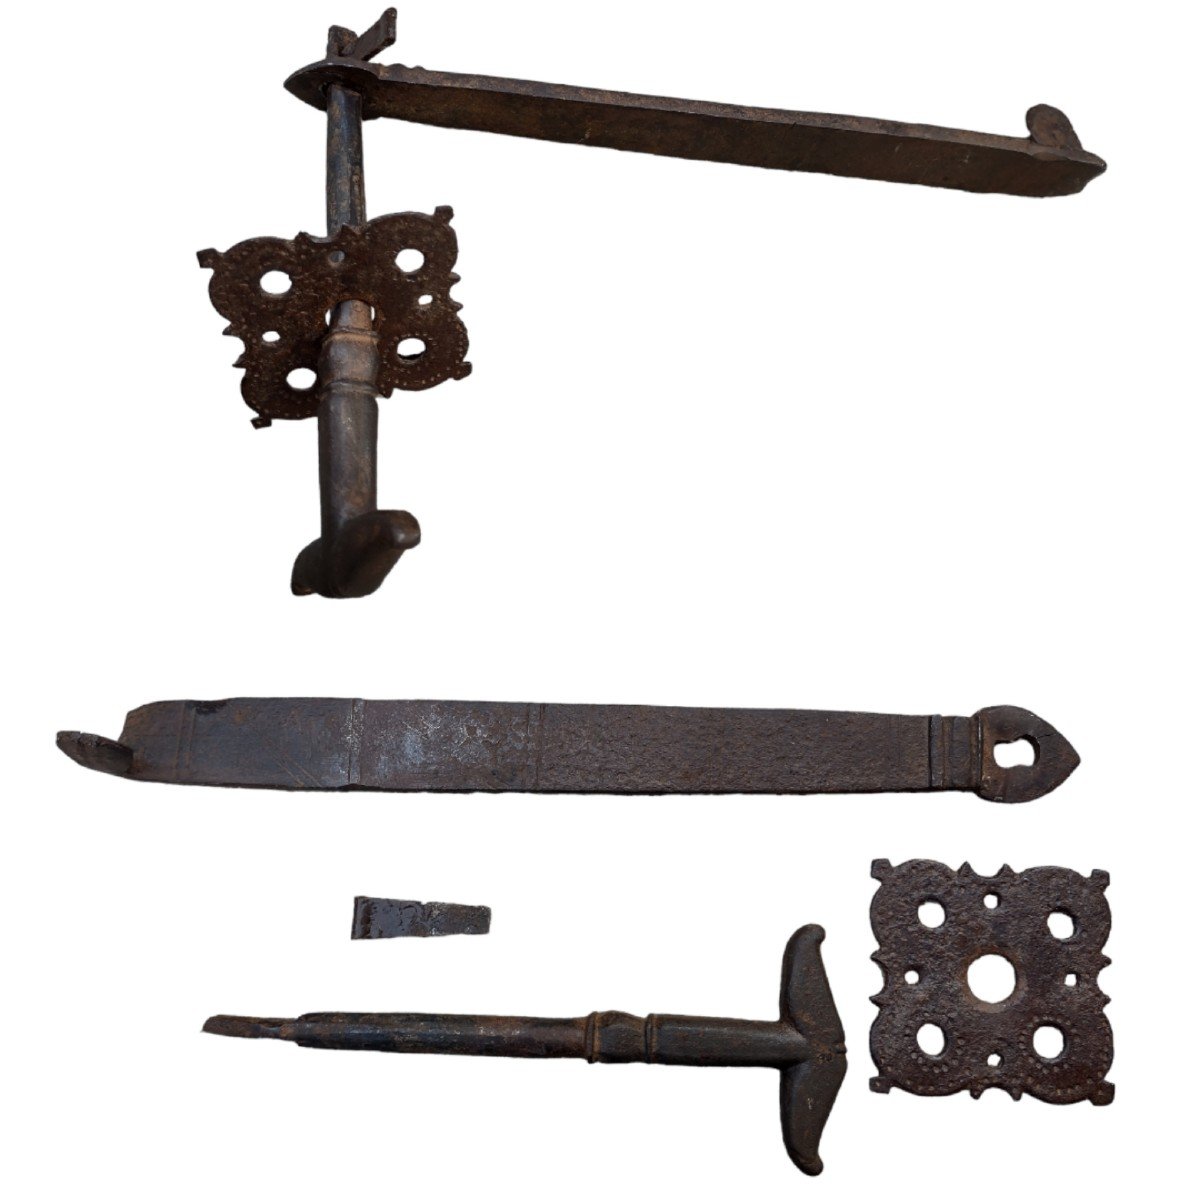 Wrought Iron Handle With 18th Century Clenche